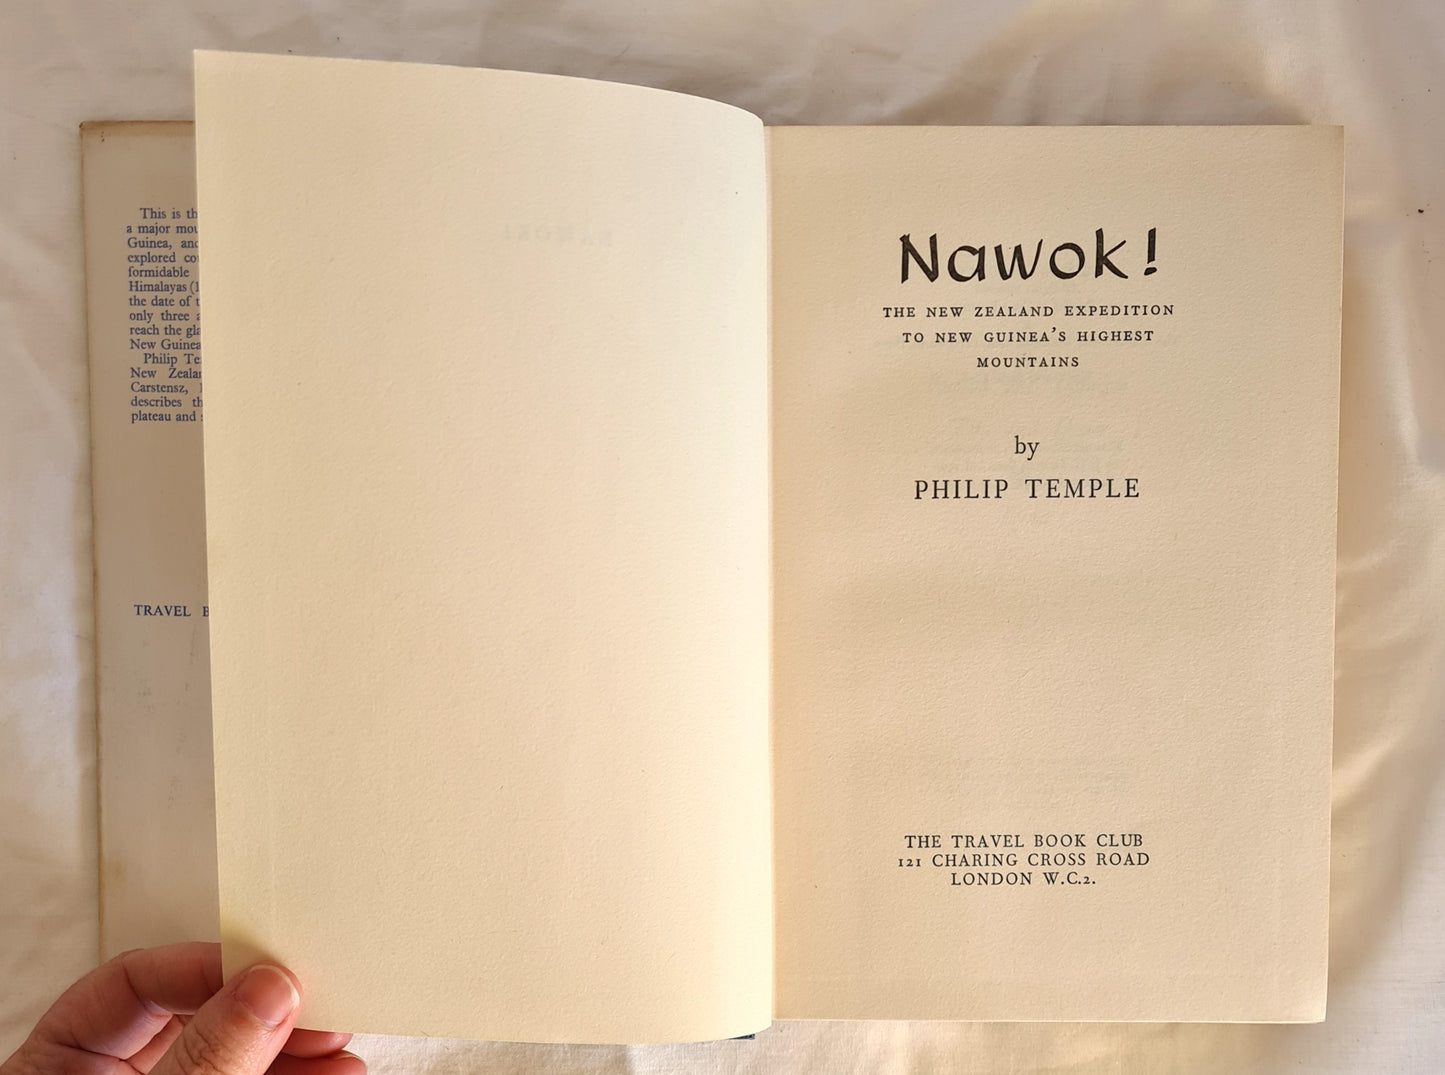 Nawok! by Philip Temple